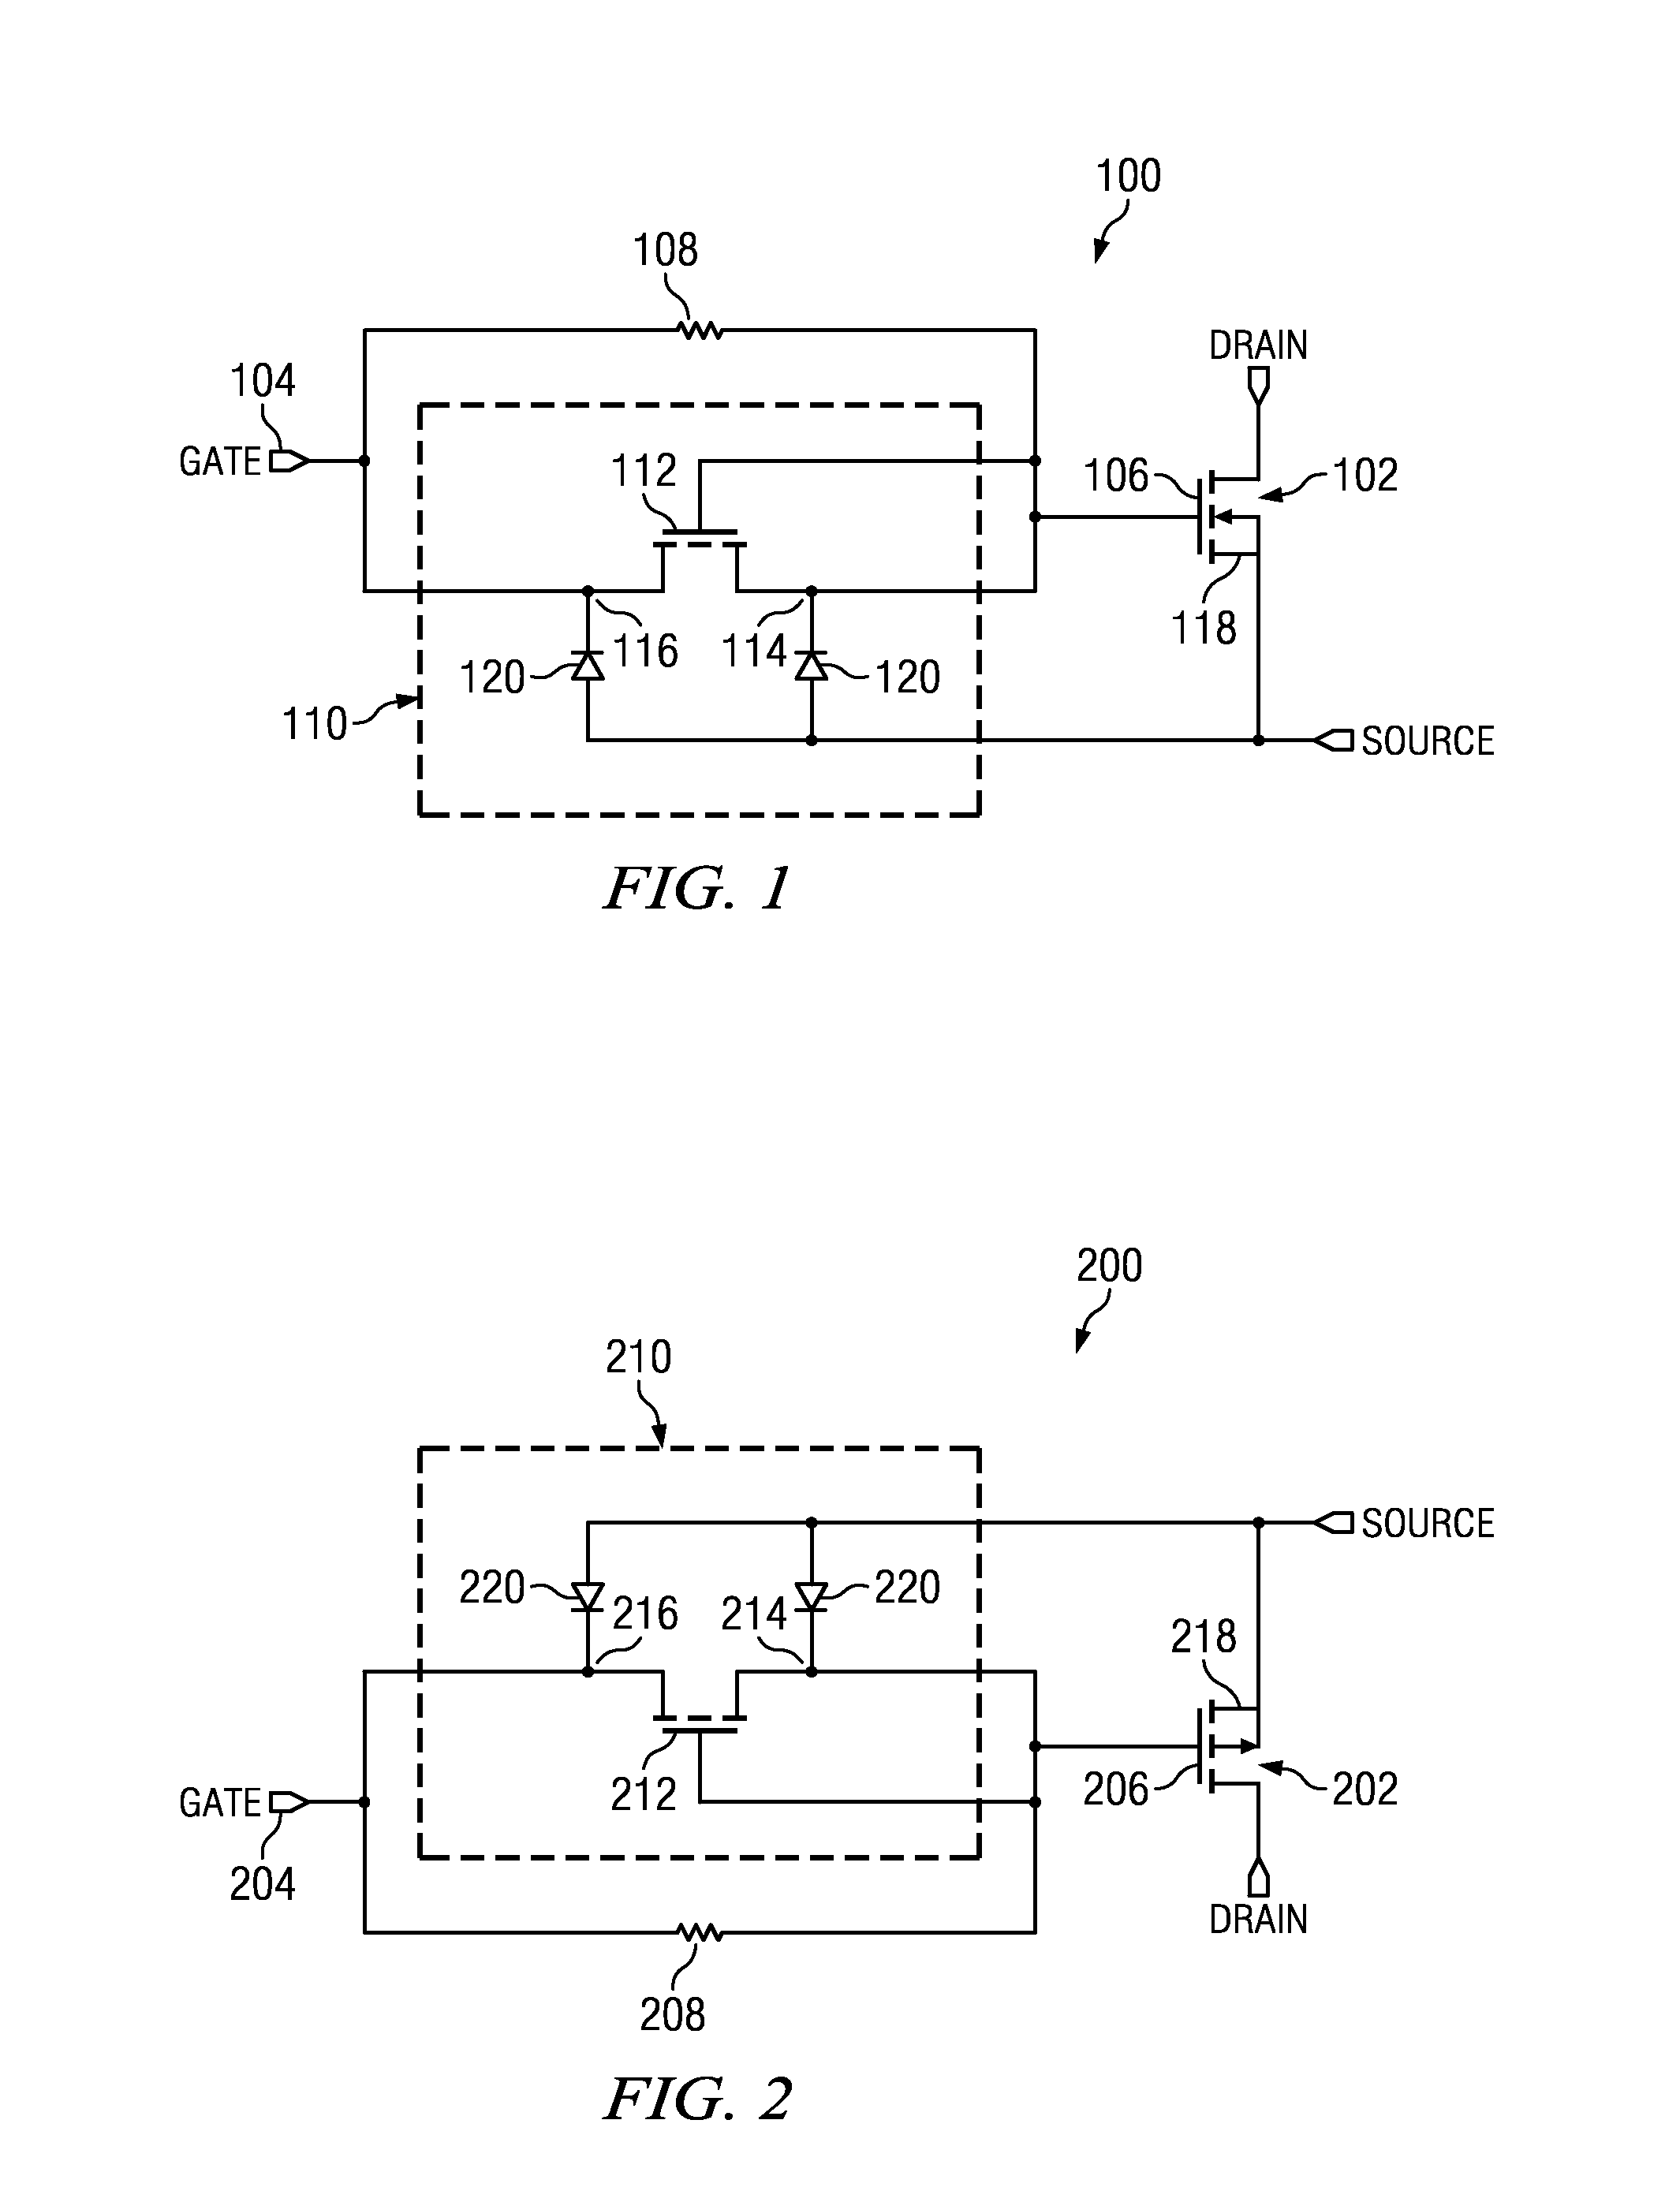 Power mosfet with integrated gate resistor and diode-connected mosfet